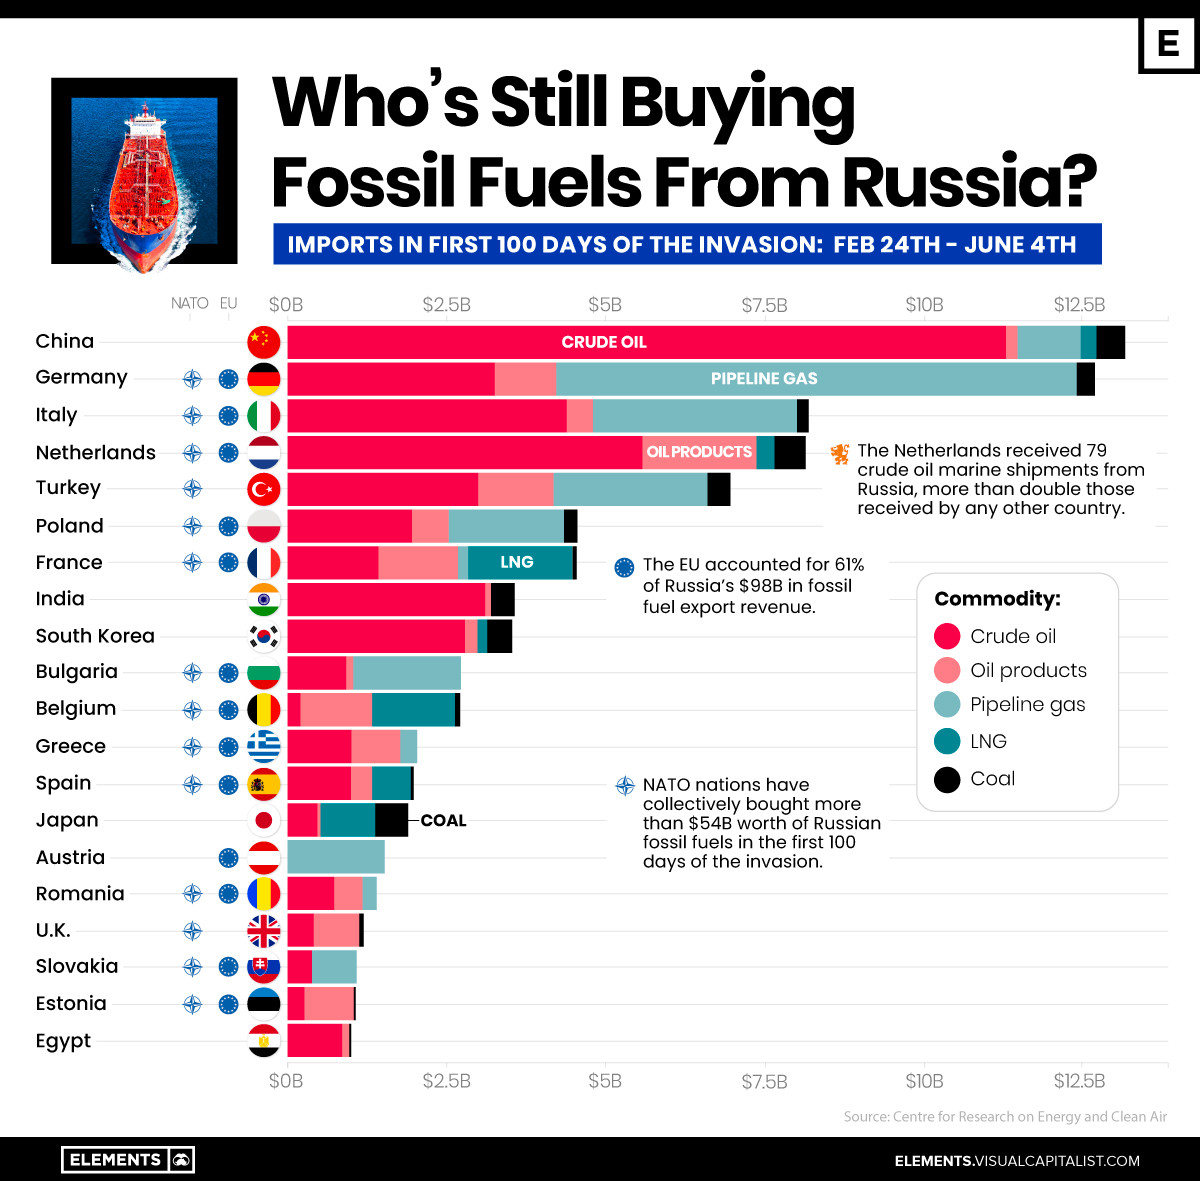 Who's Still Buying Fossil Fuels From Russia?